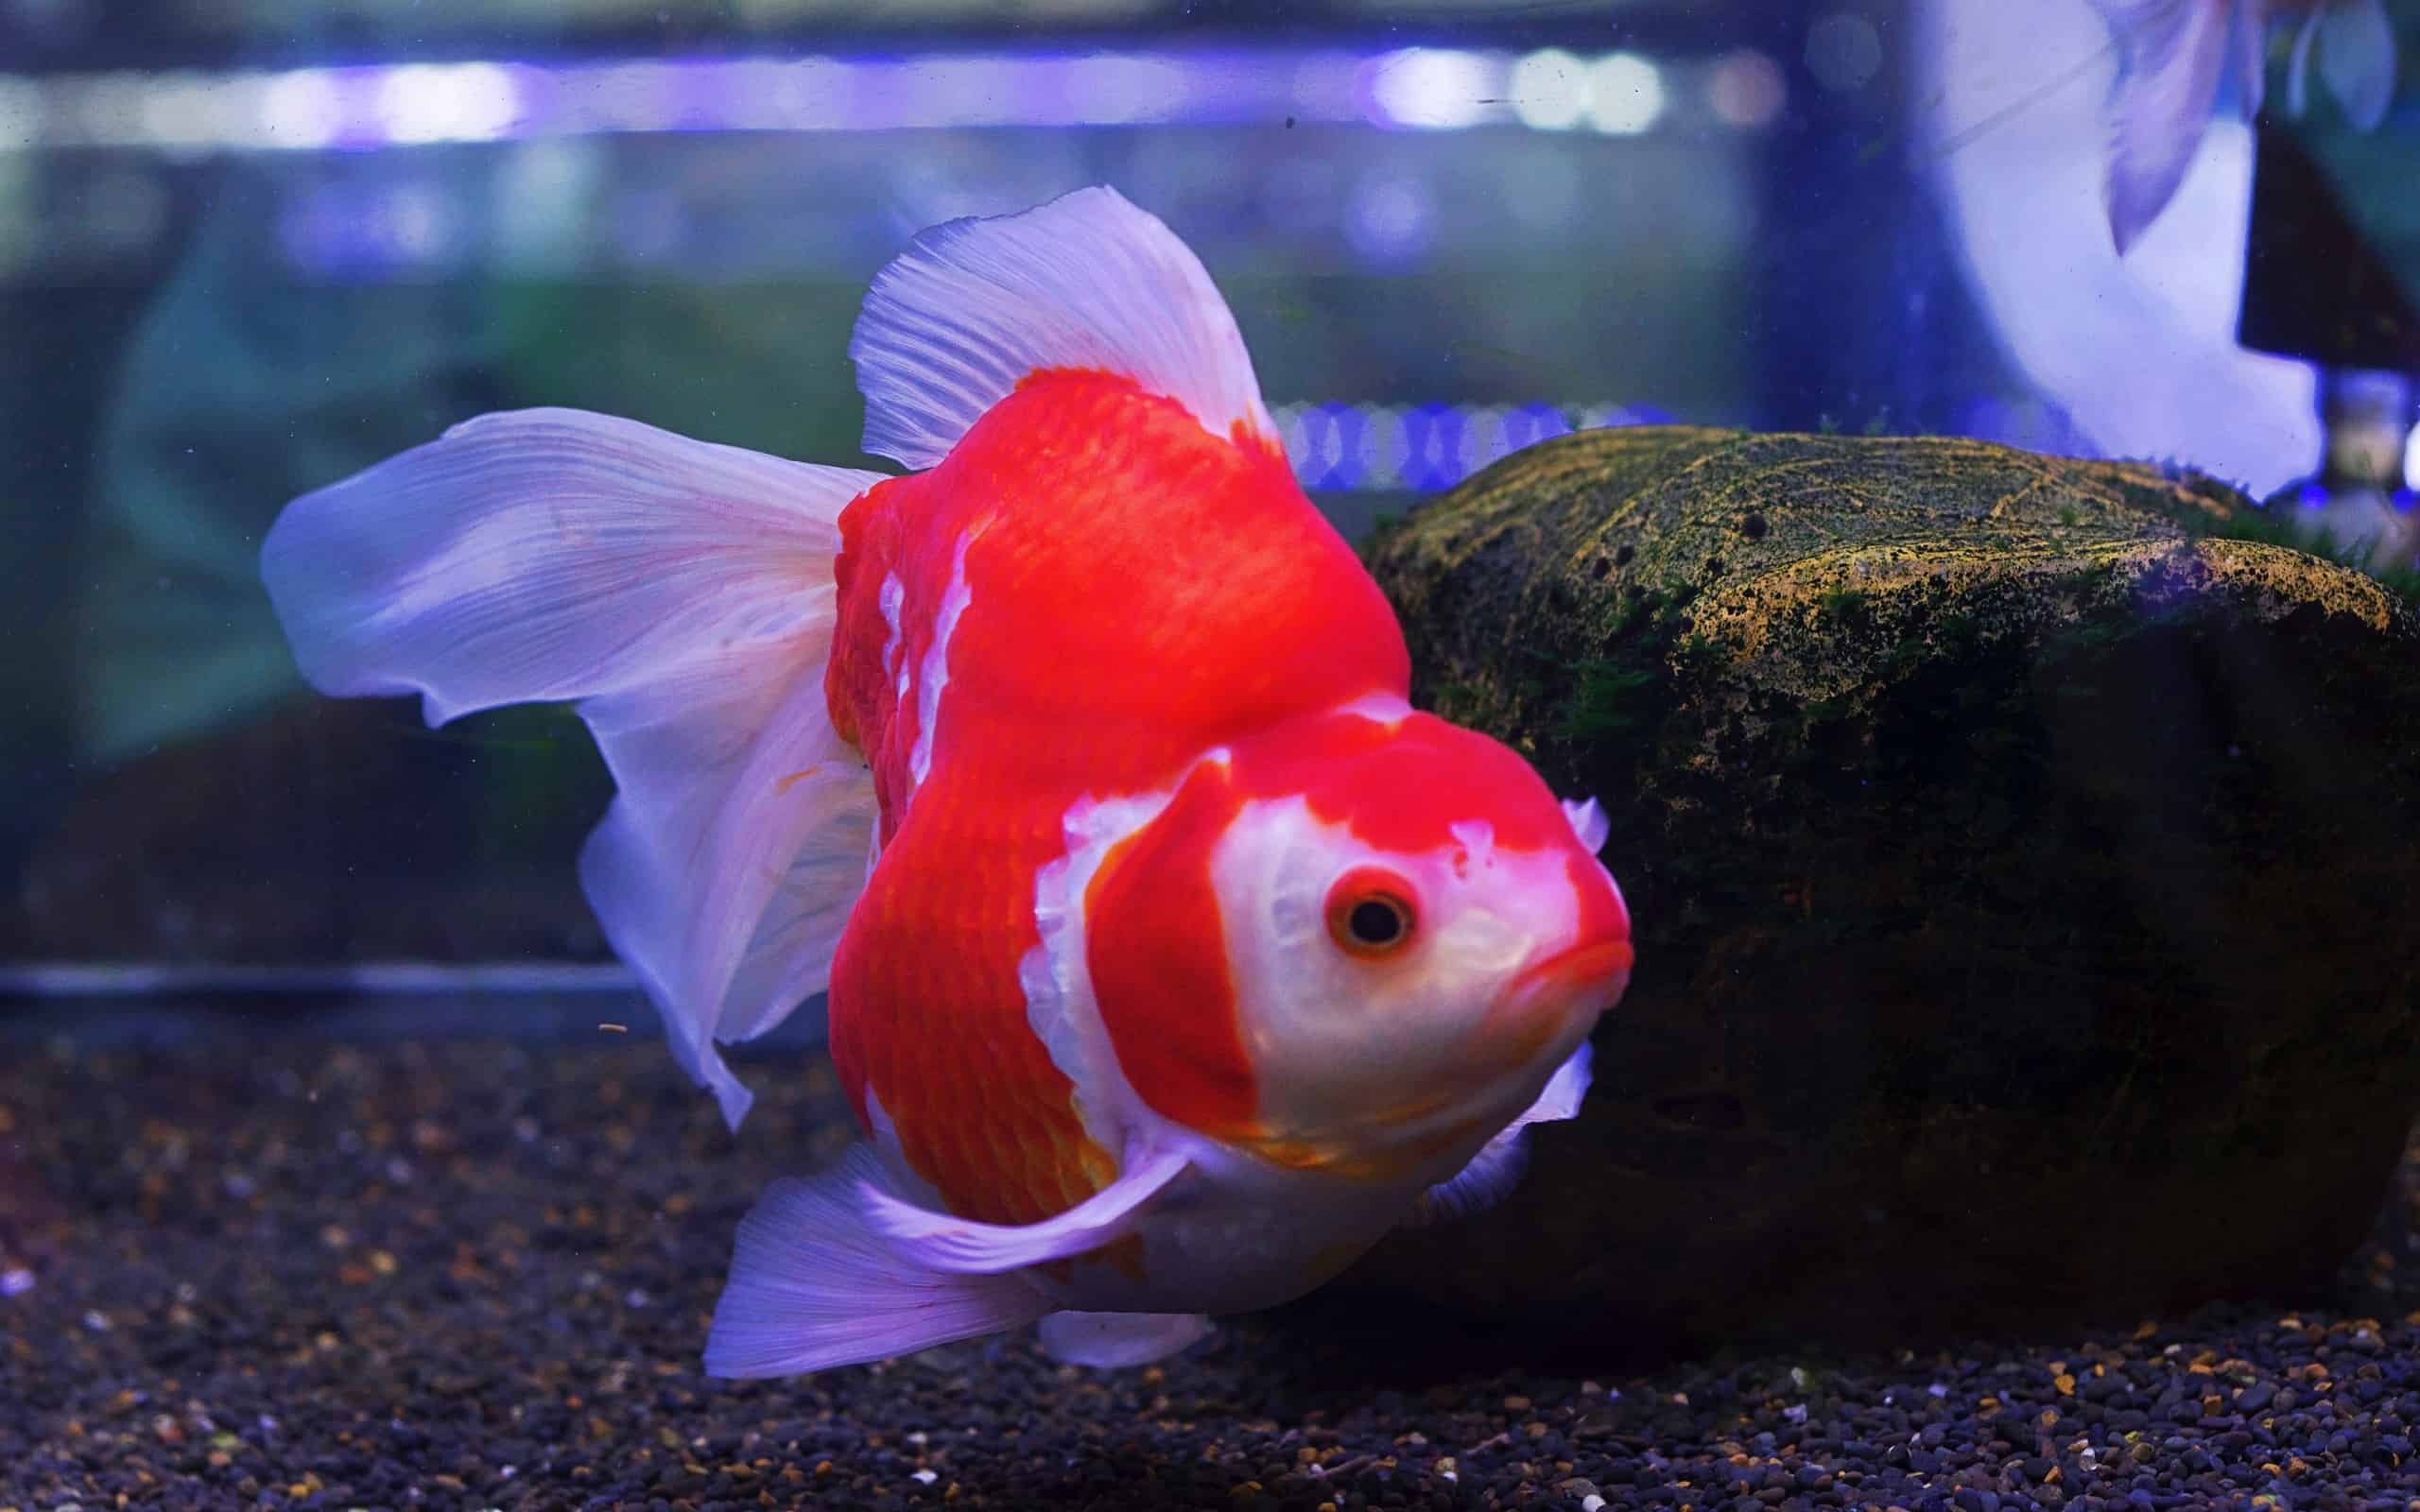 Red and white Tamasaba goldfish from Japan